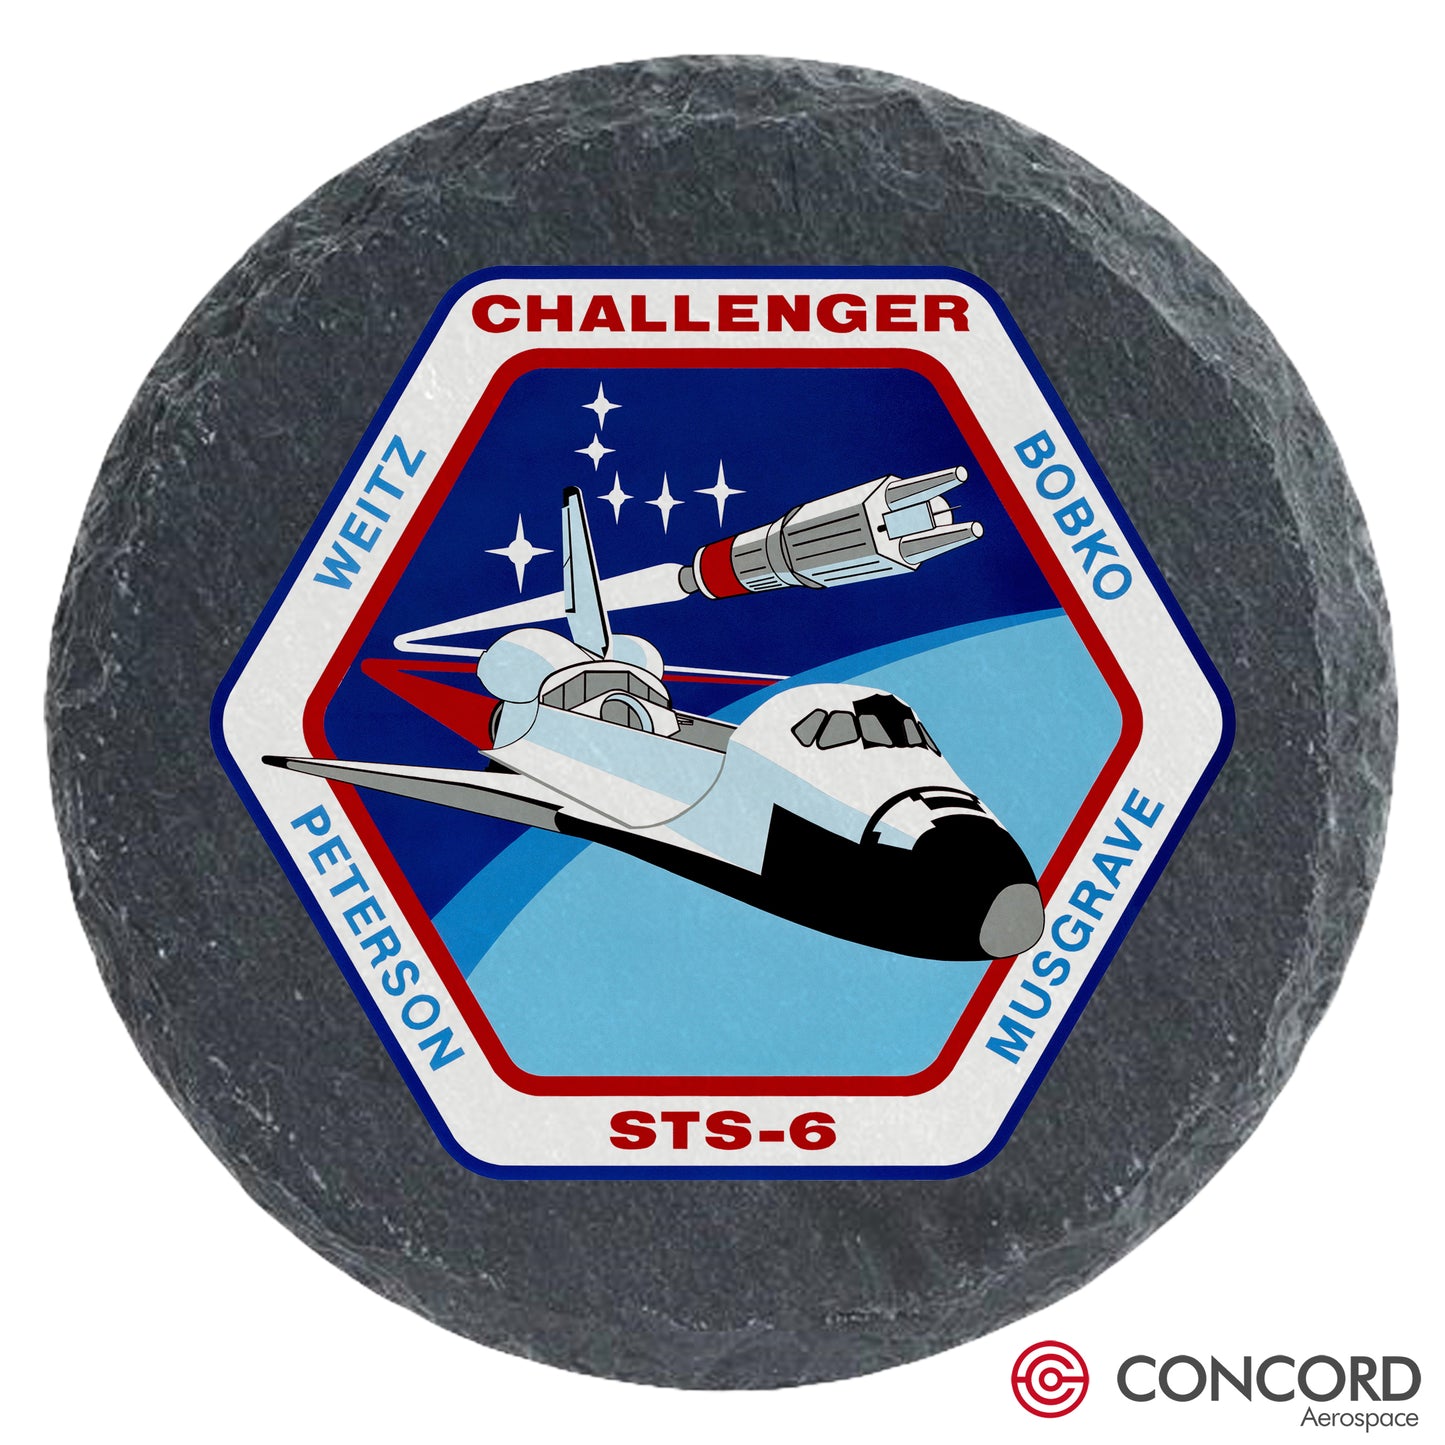 STS - 6 SPACE SHUTTLE - SLATE COASTER - Concord Aerospace Concord Aerospace Concord Aerospace Coasters